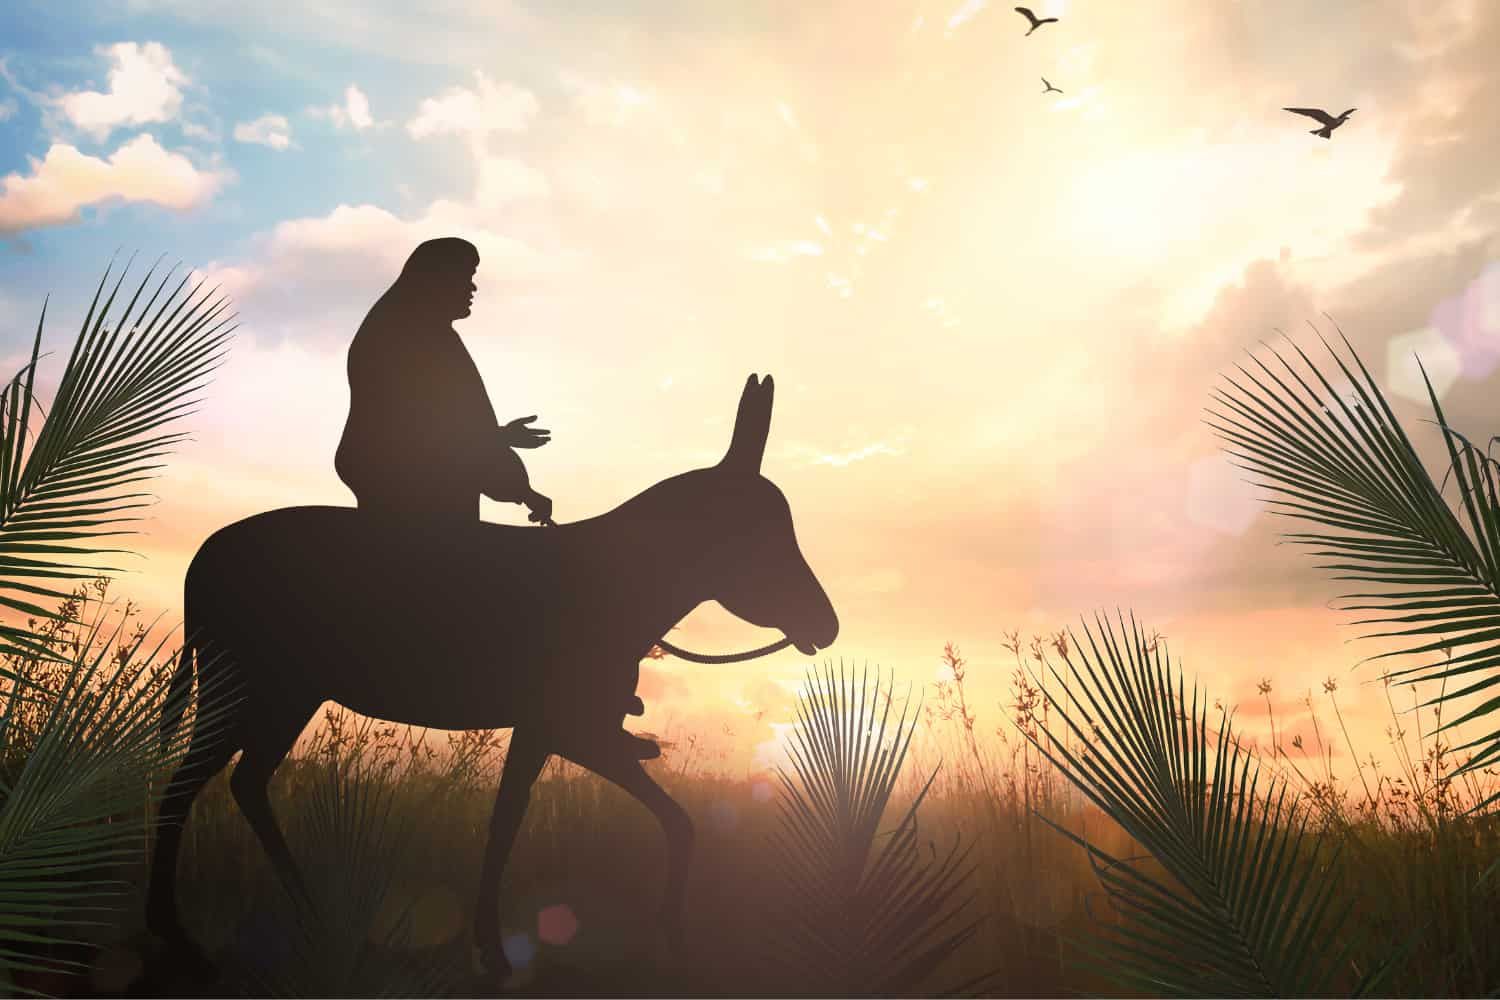 Lesson%20-%20NT%20Easter%2002%20-%20Palm%20Sunday%202%20Humble%20on%20a%20donkey-c3dfbb64 Jesus - His encounters